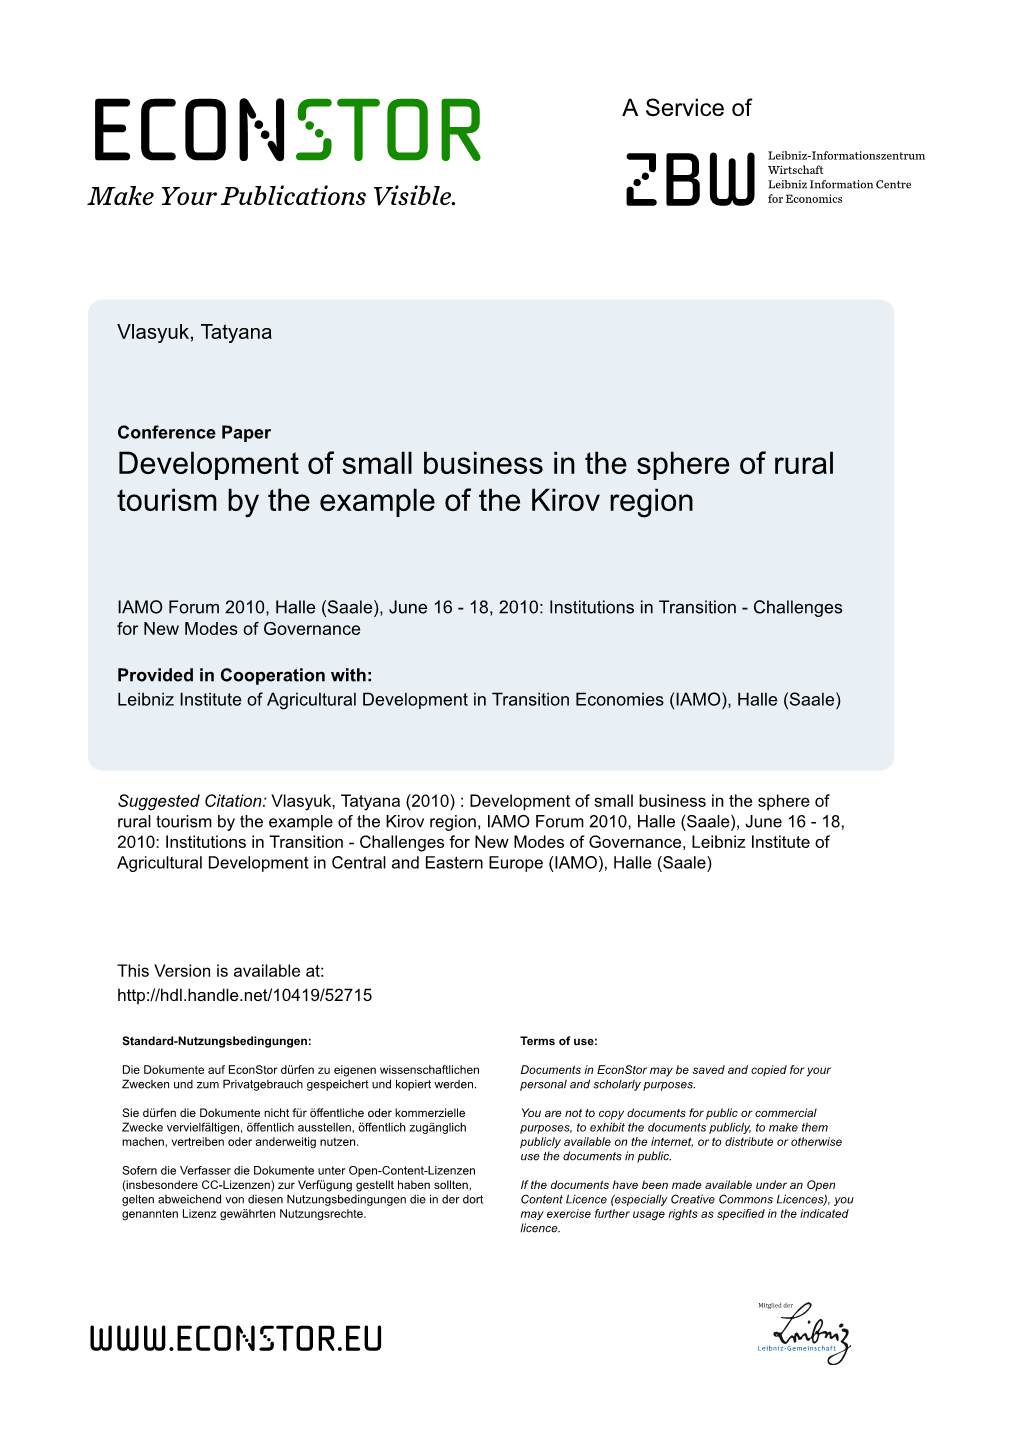 Development of Small Business in the Sphere of Rural Tourism by the Example of the Kirov Region